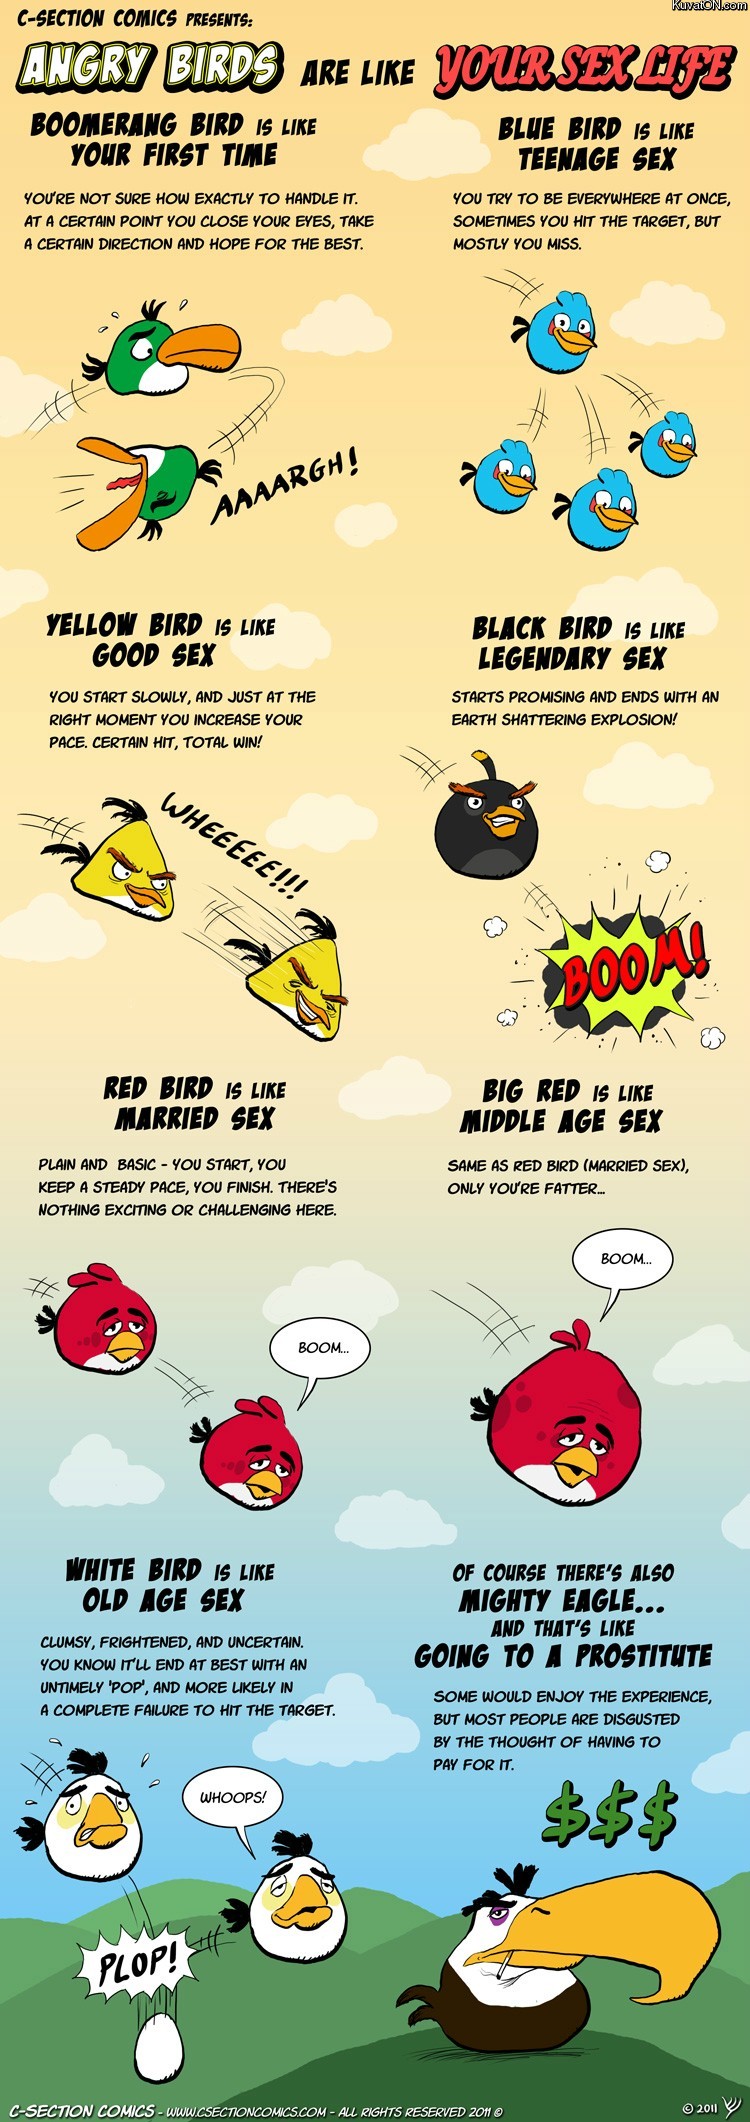 Angry birds and your sexlife